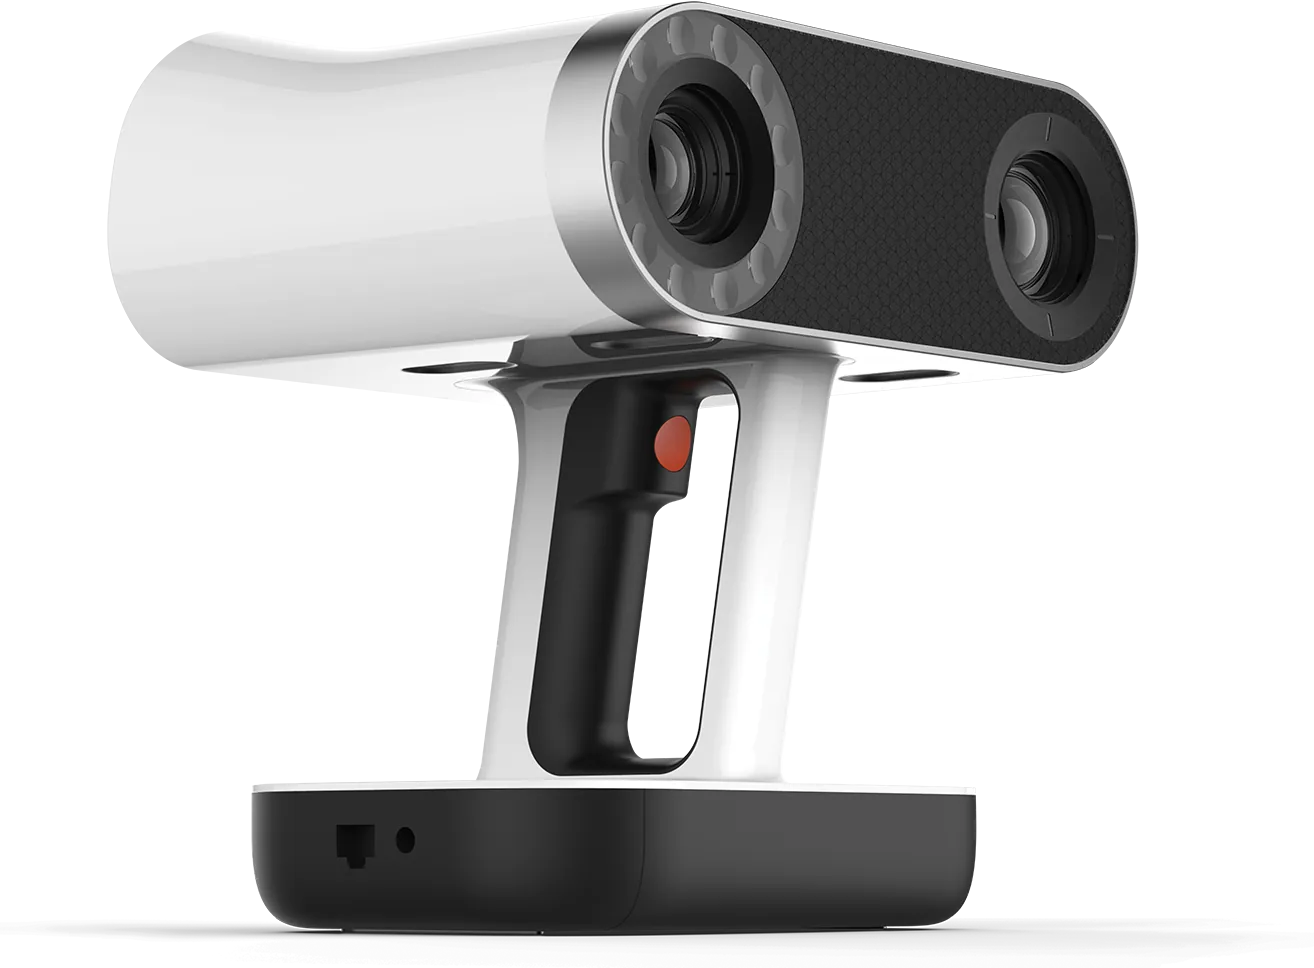 Learn More About the Arctec Leo 3D Scanner at GoEngineer